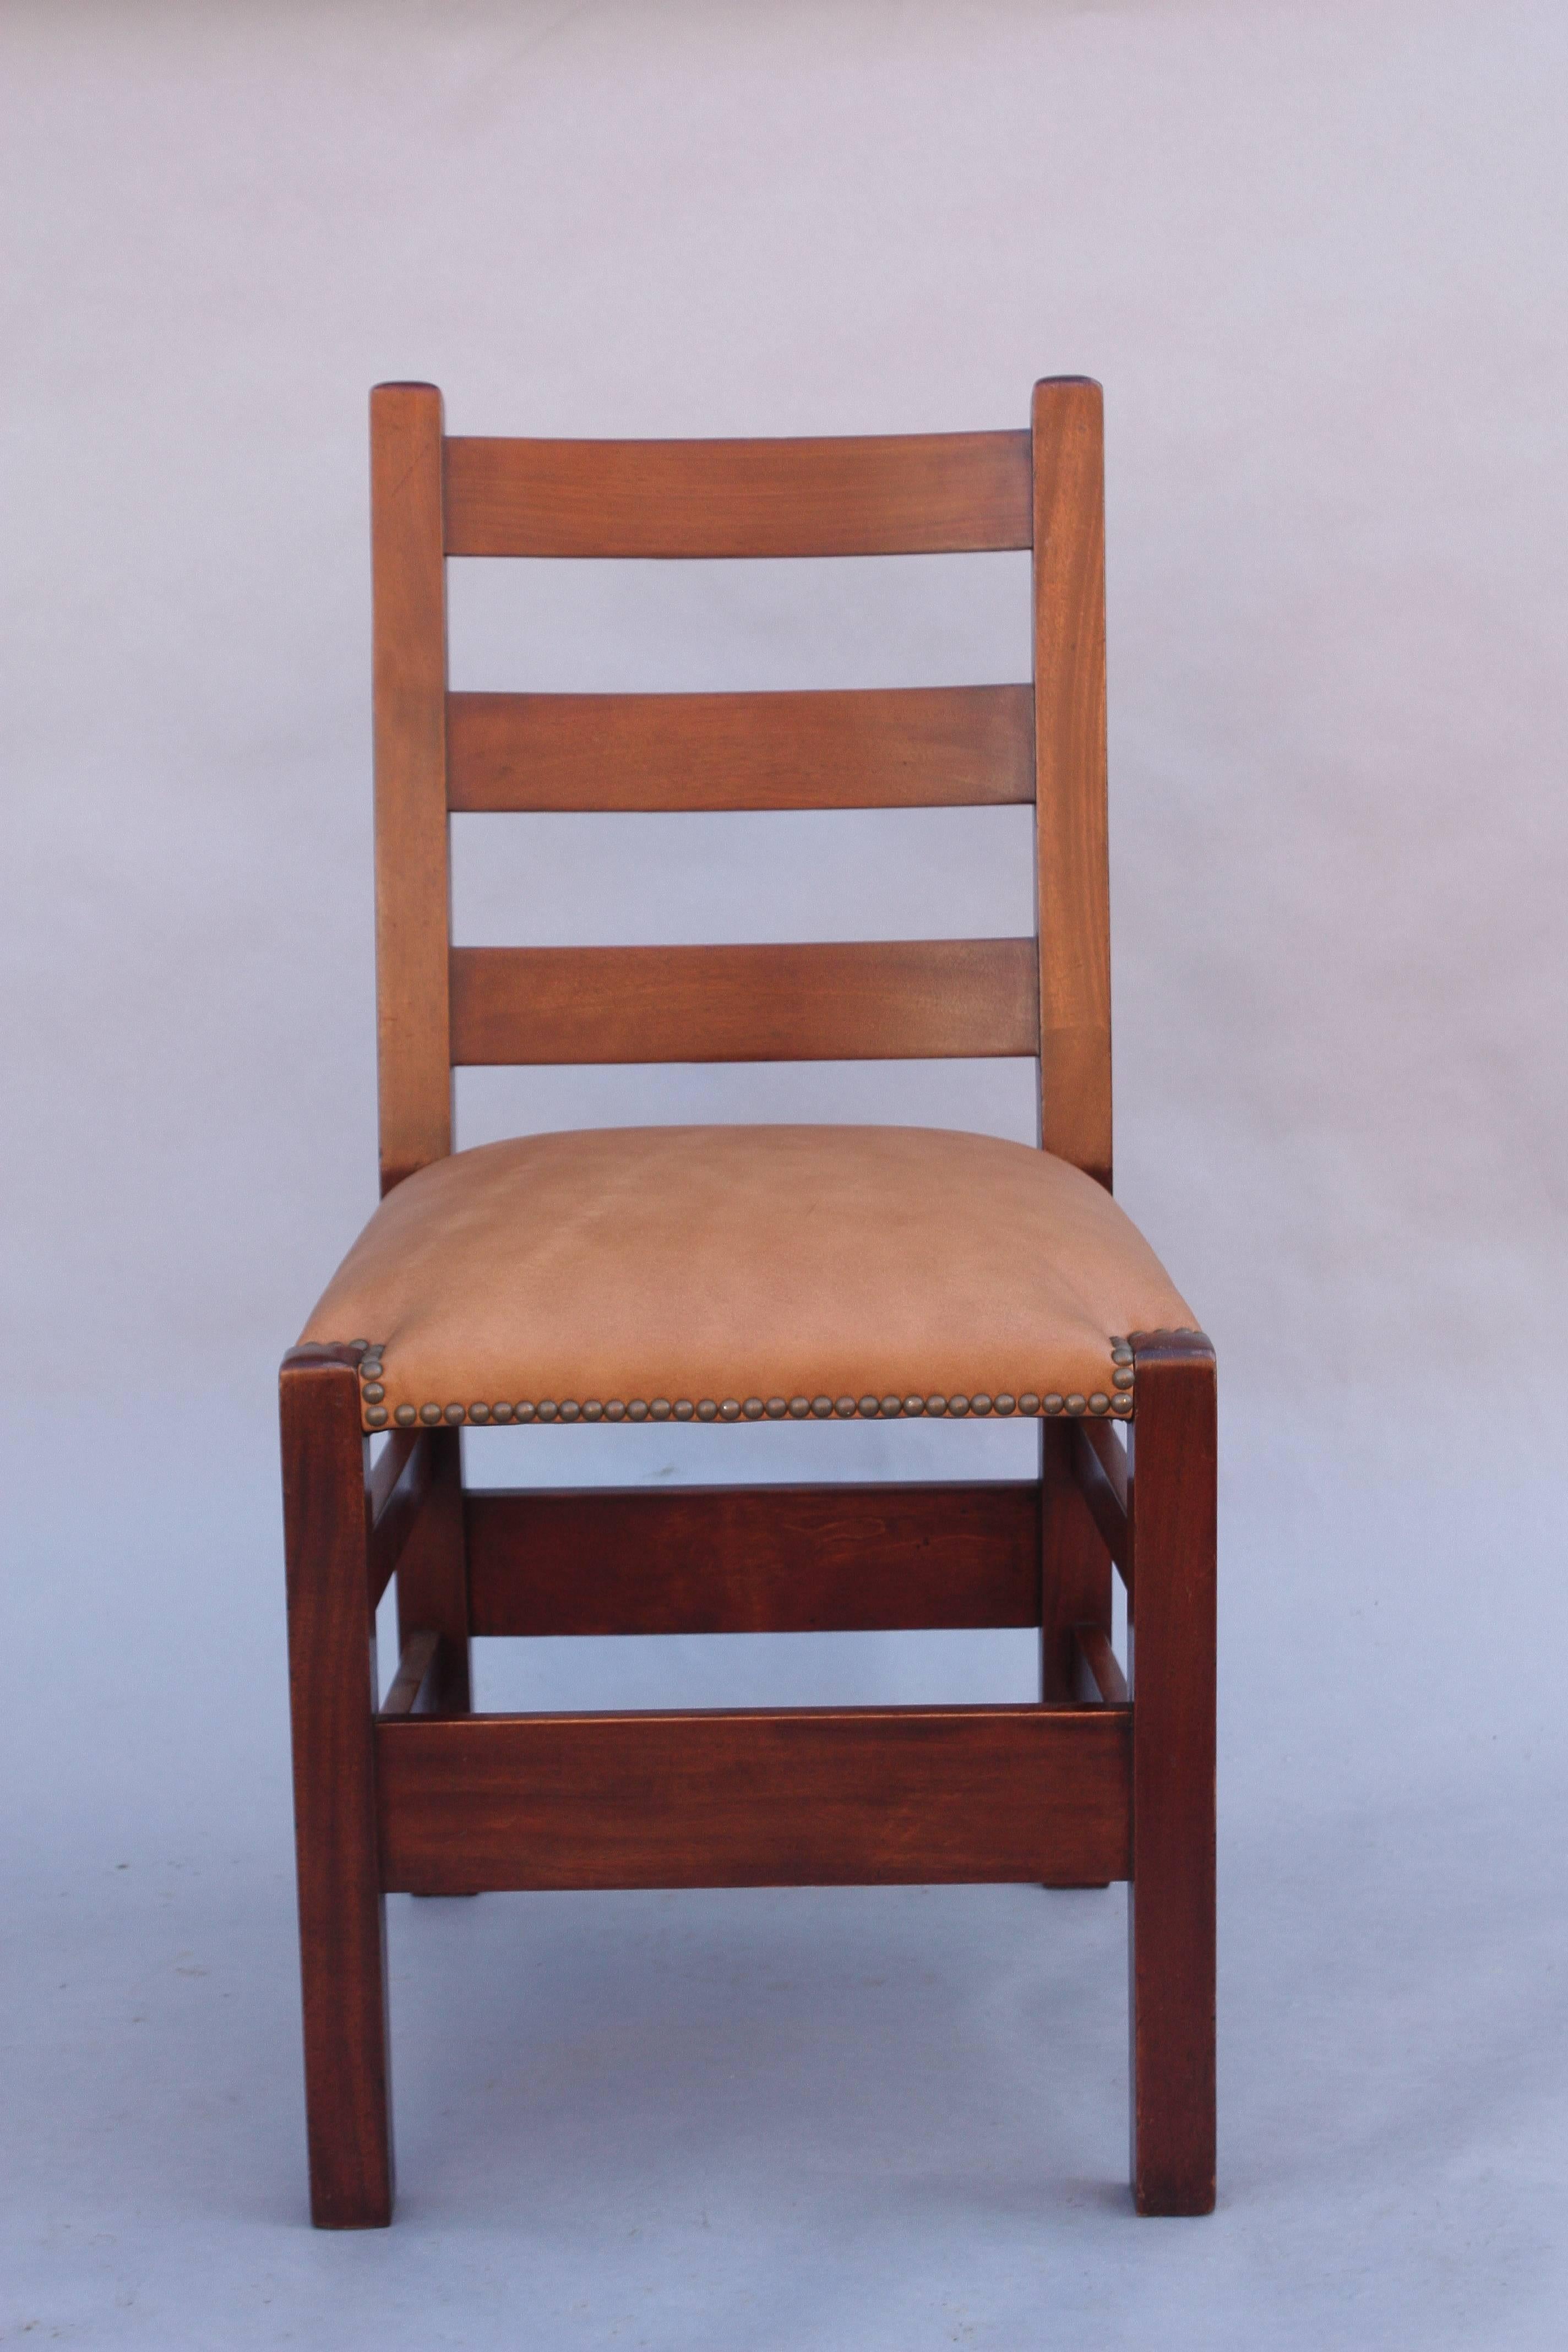 Arts & Crafts period side chair with new riveted leather upholstery, circa 1910.